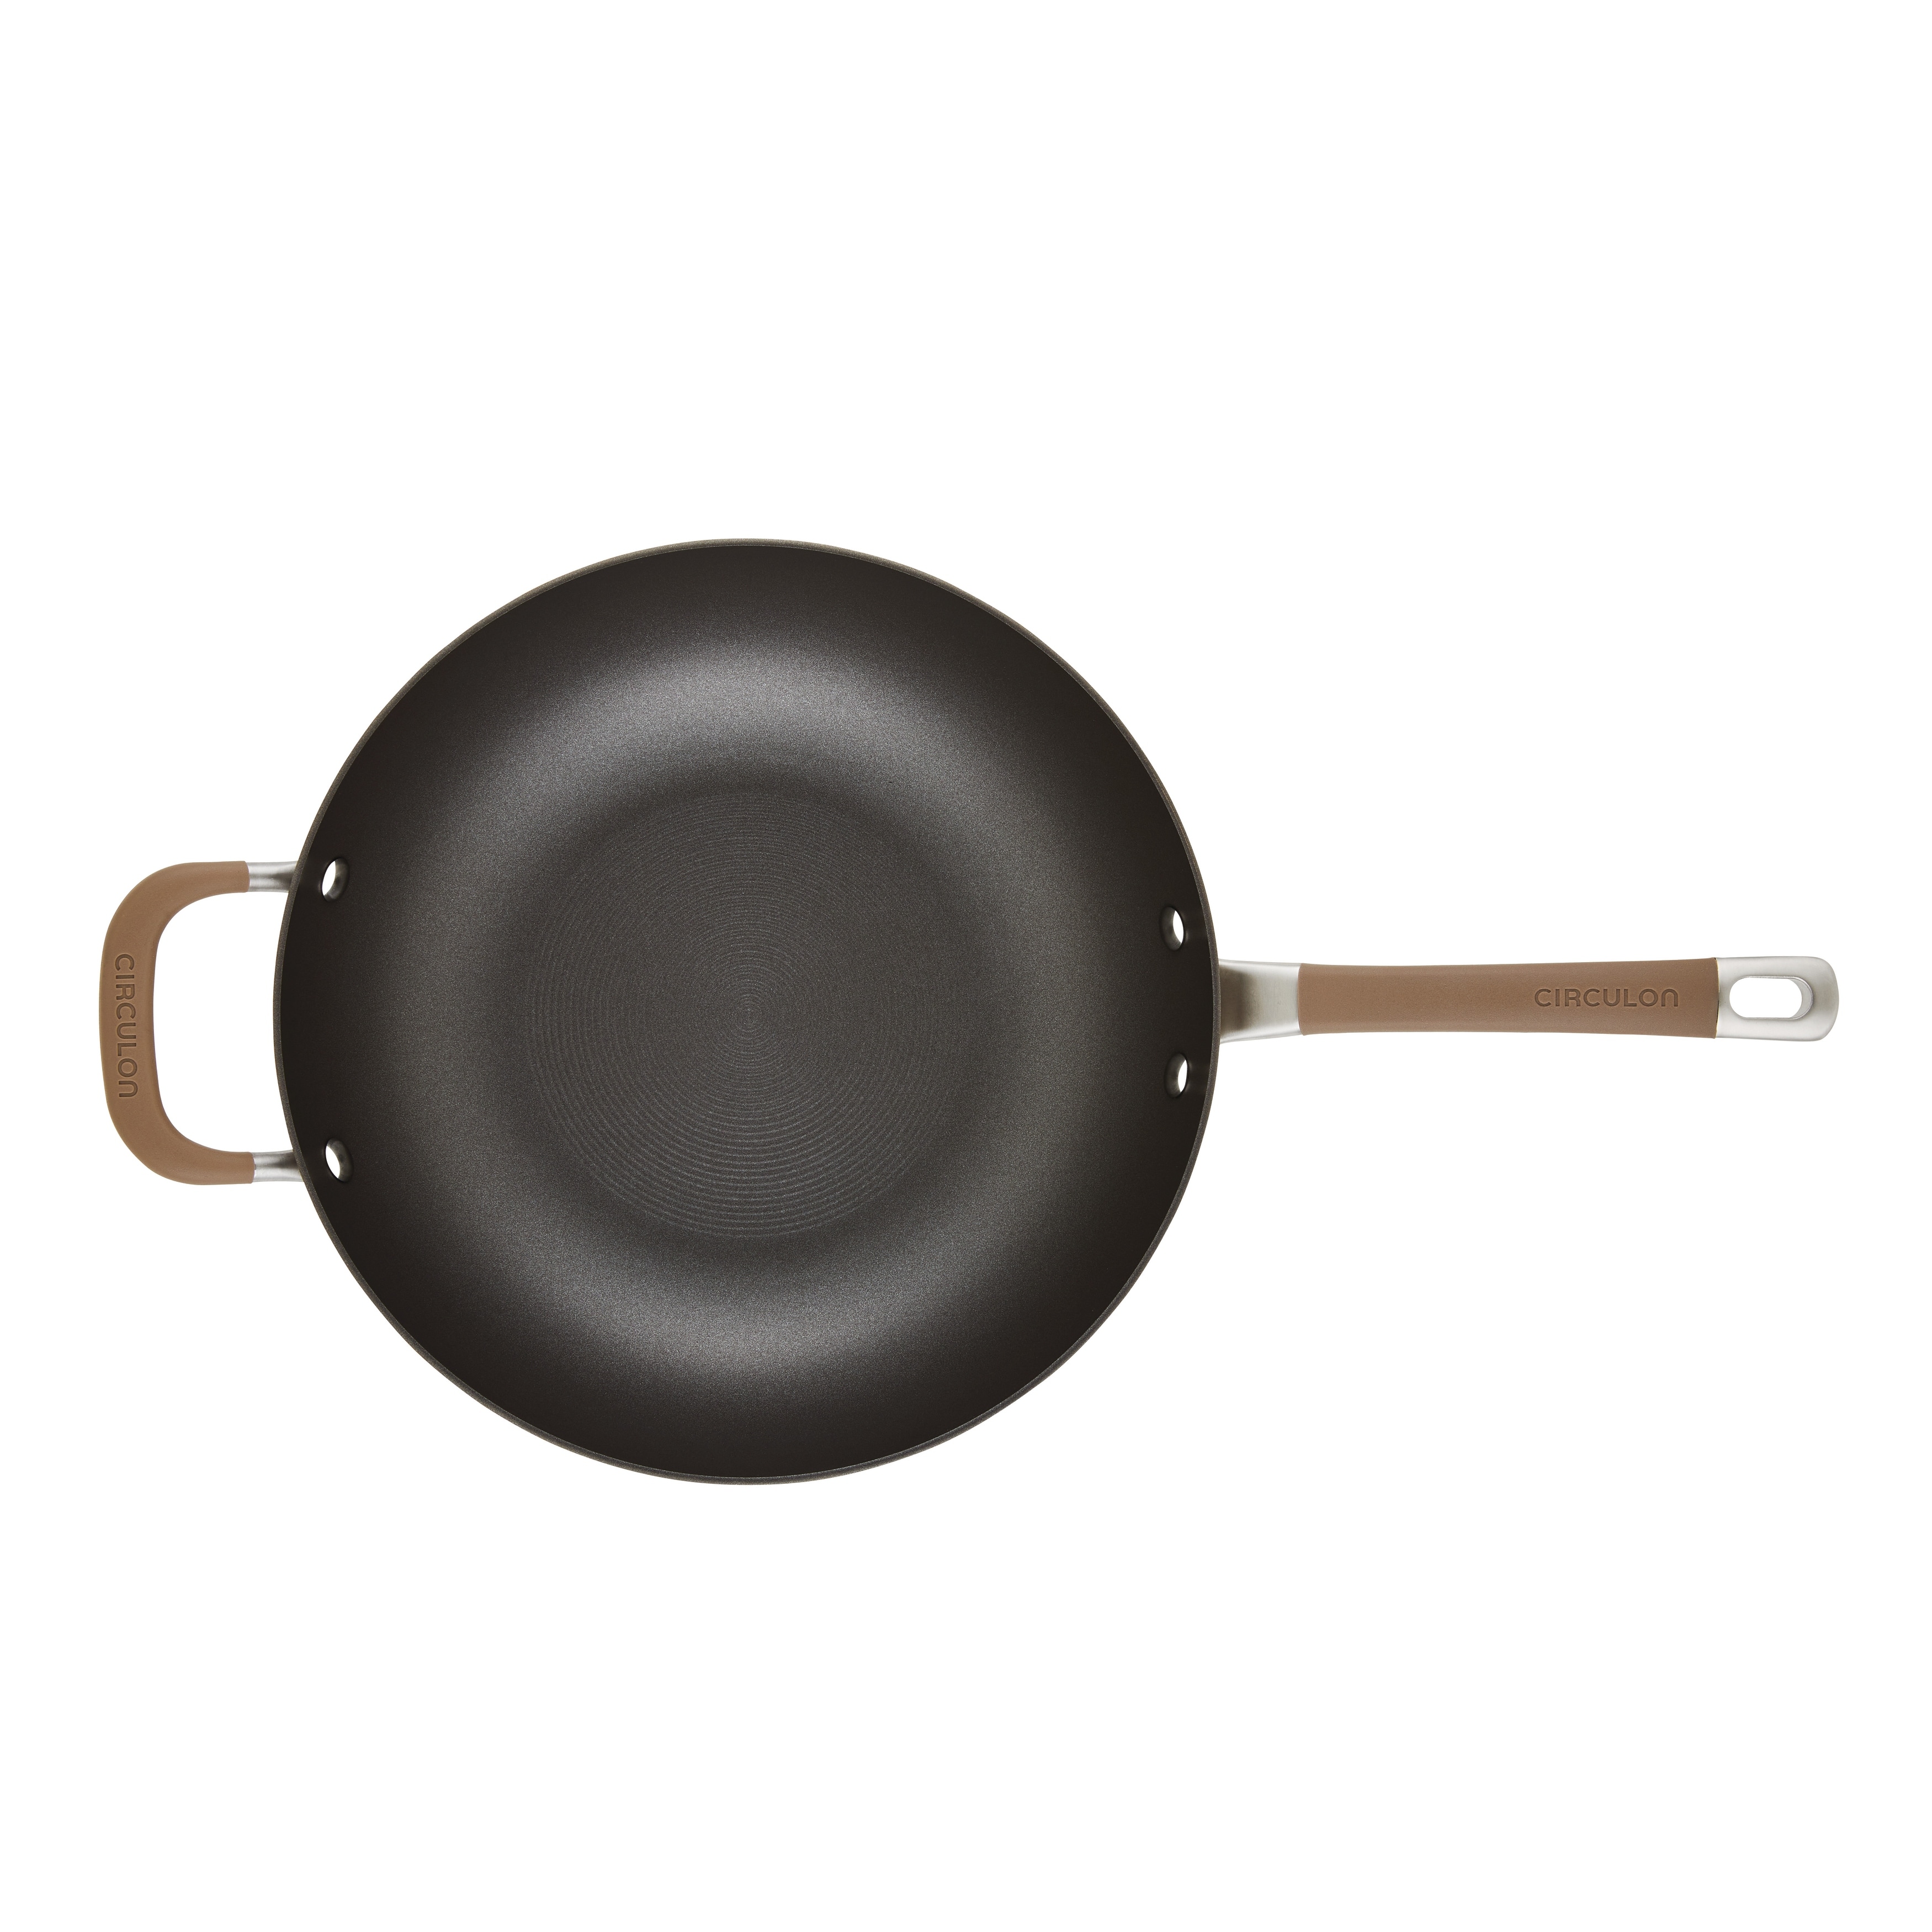 https://ak1.ostkcdn.com/images/products/is/images/direct/303345d2b384cb6a65fcb054237edf6312a6b70d/Circulon-Premier-Professional-Hard-Anodized-Nonstick-Induction-Jumbo-Cooker-with-Helper-Handle-and-Lid%2C-12-Inch%2C-Bronze.jpg